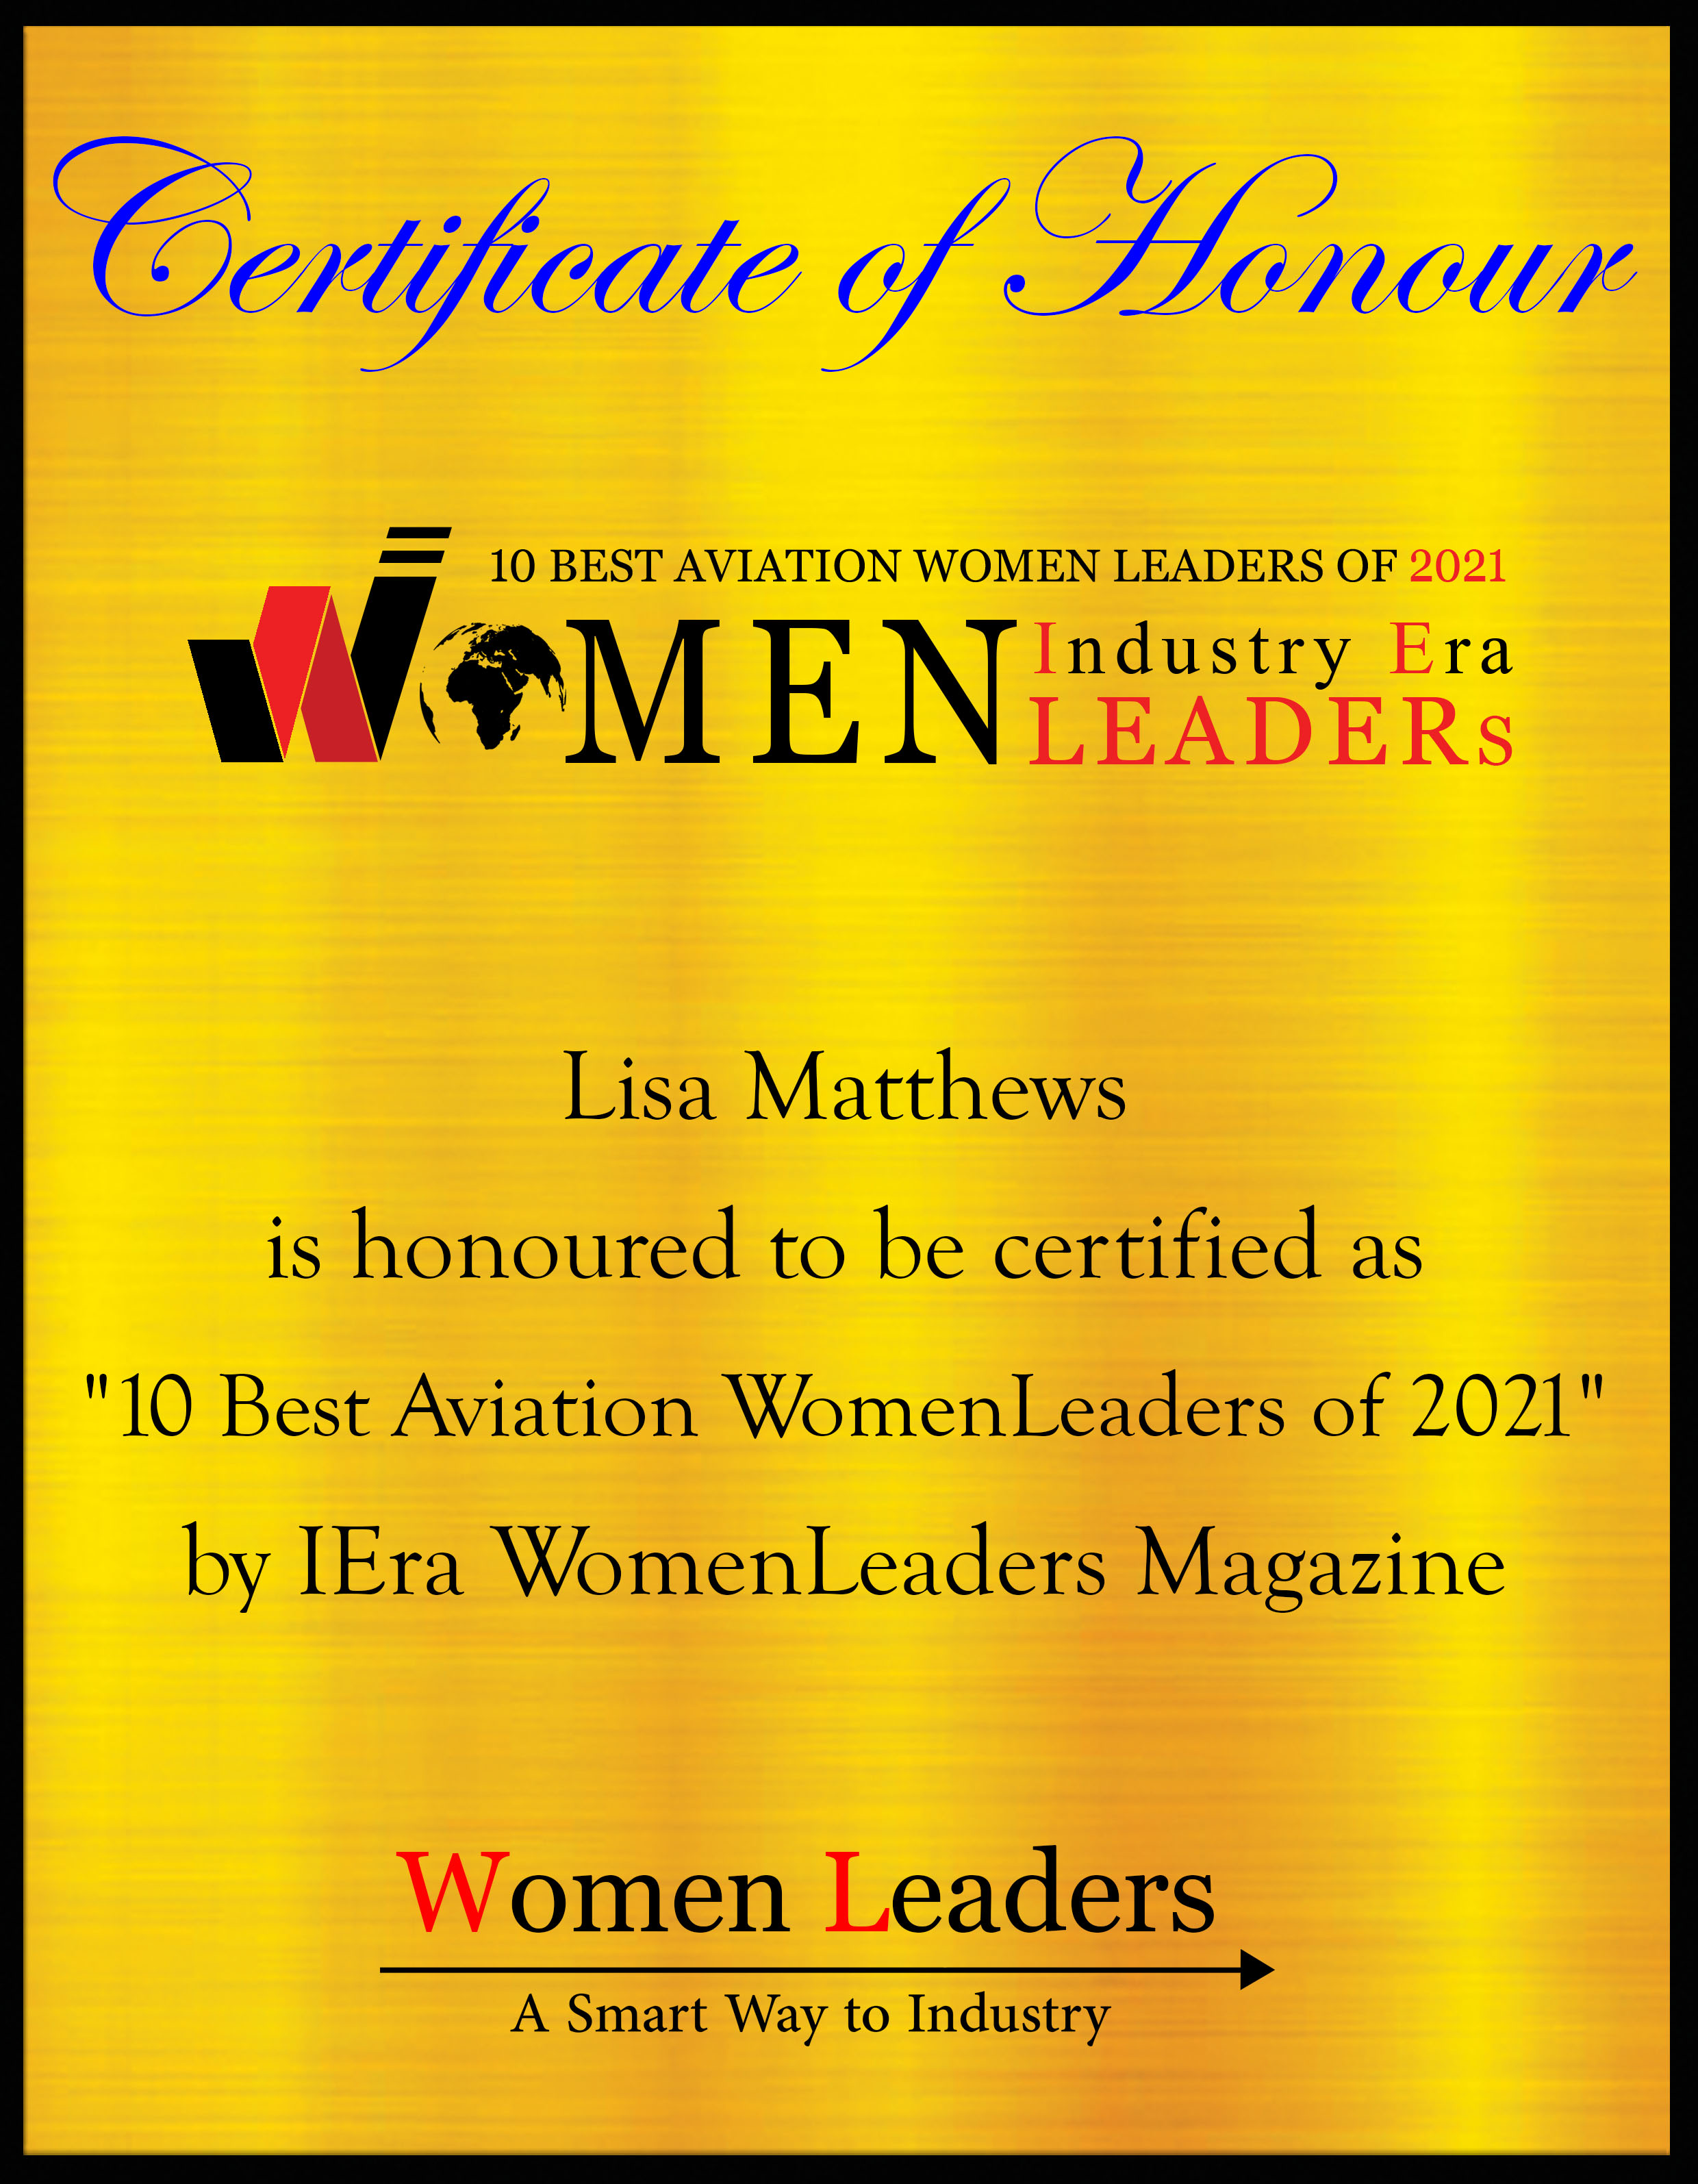 Lisa Matthews Director of New Business Development Visionary Training Resources, Most Aviation WomenLeaders of 2021